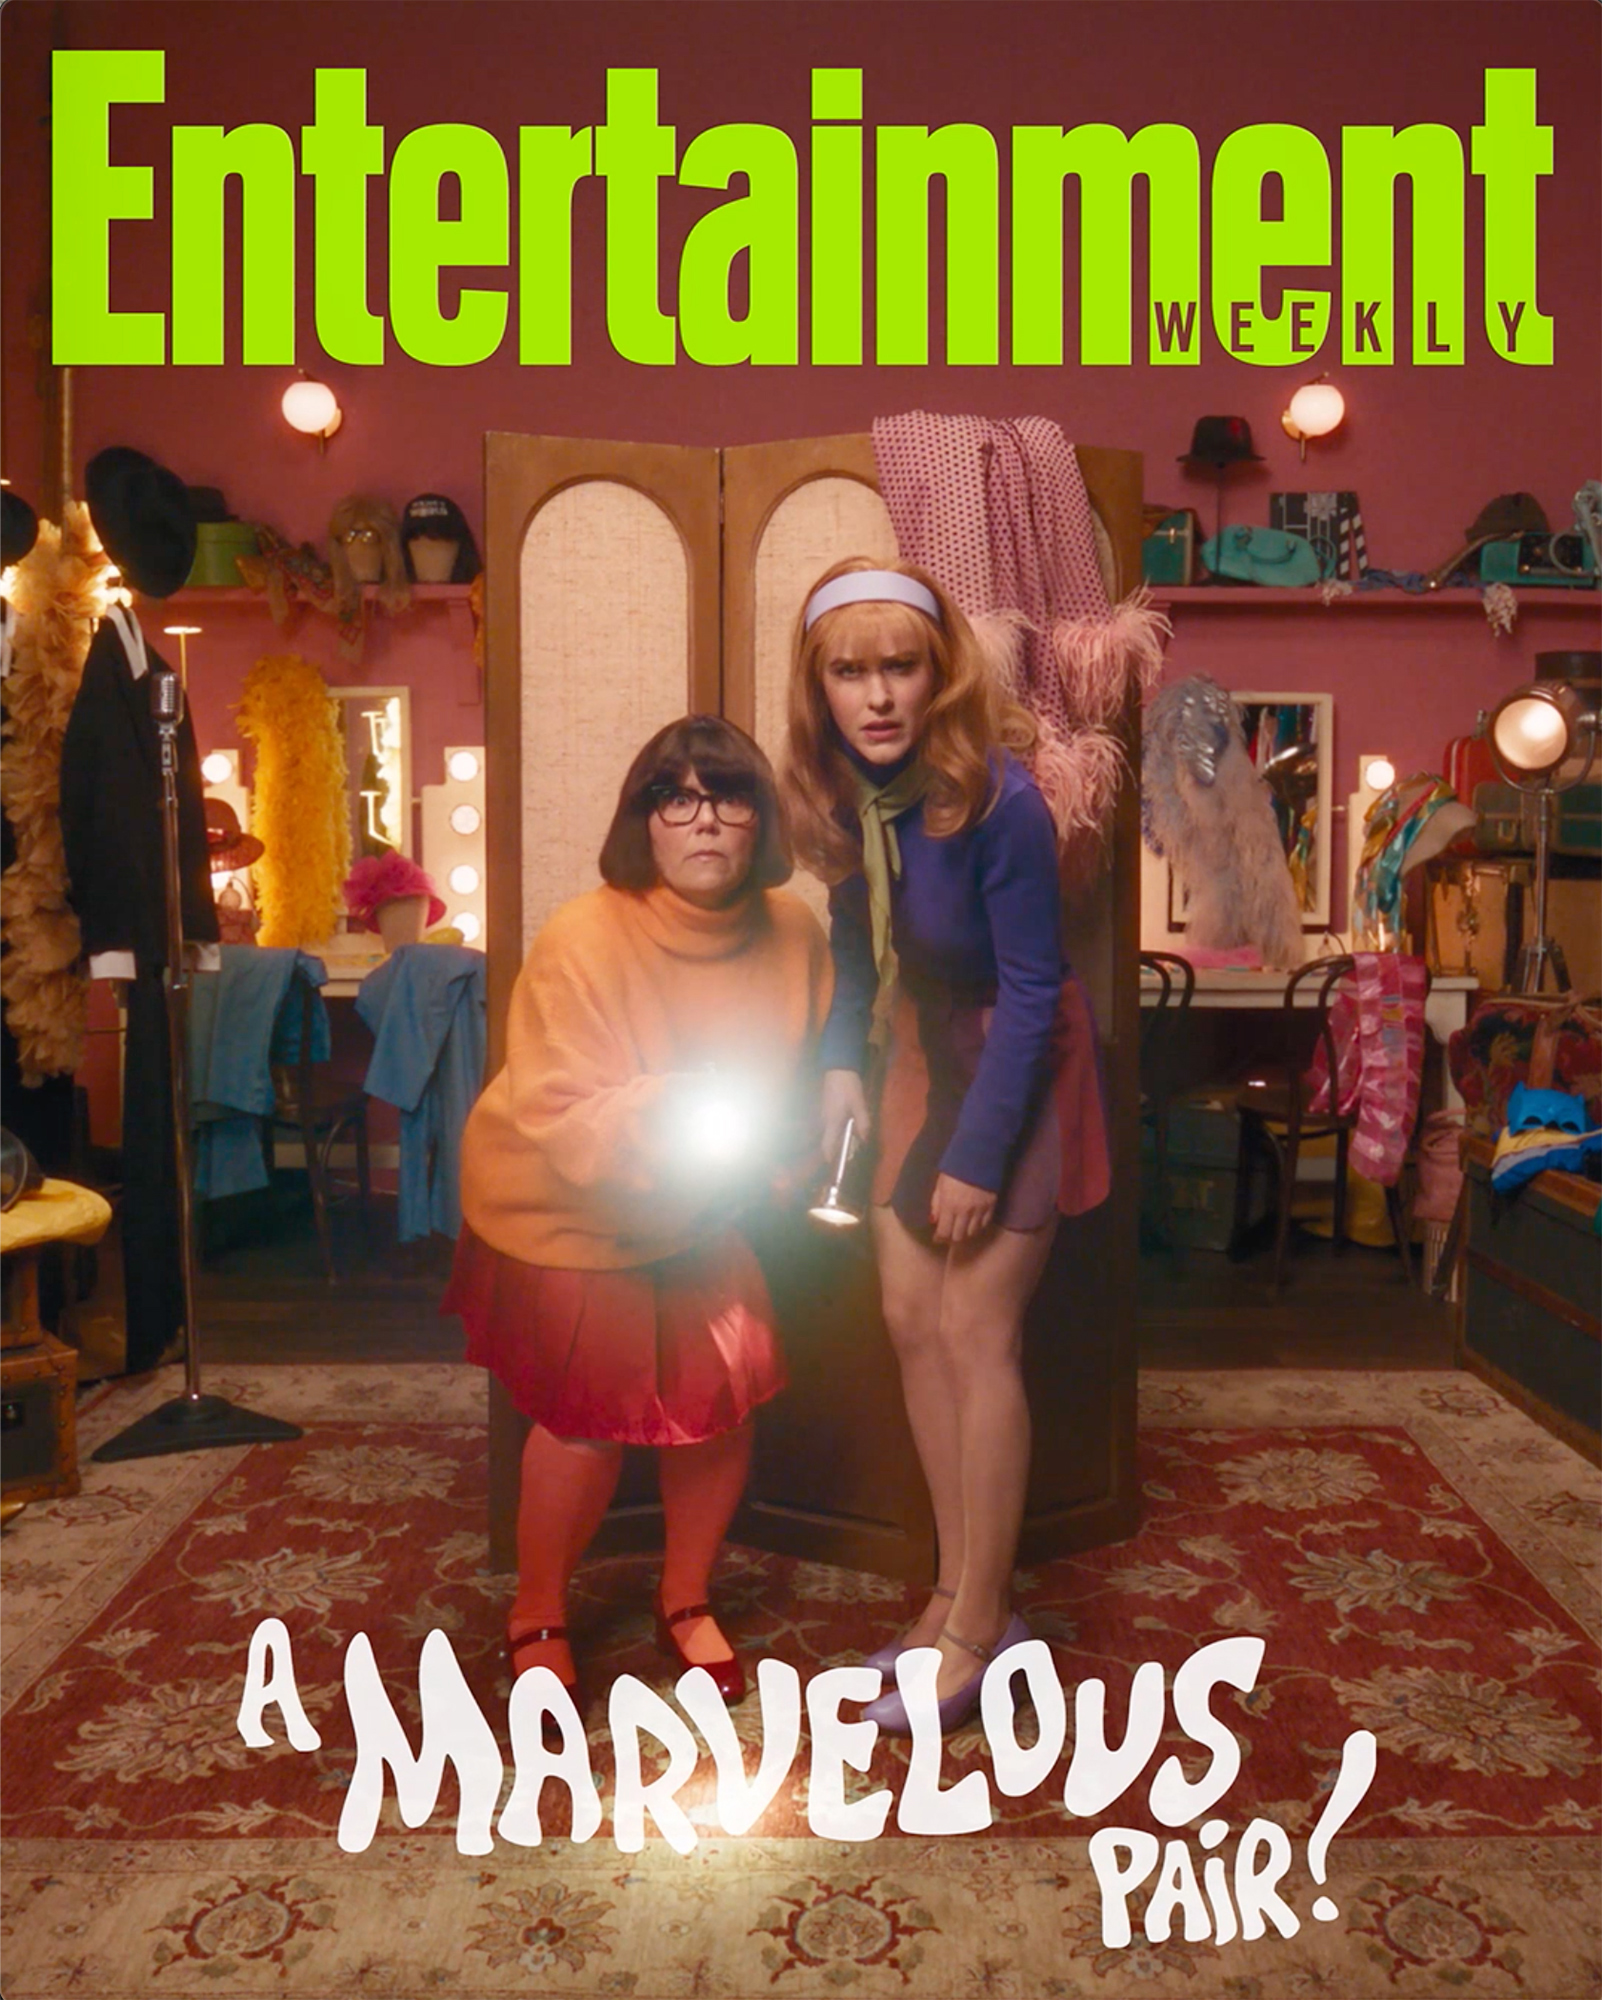 Entertainment Weekly - “A Marvelous Pair," April 11, 2023